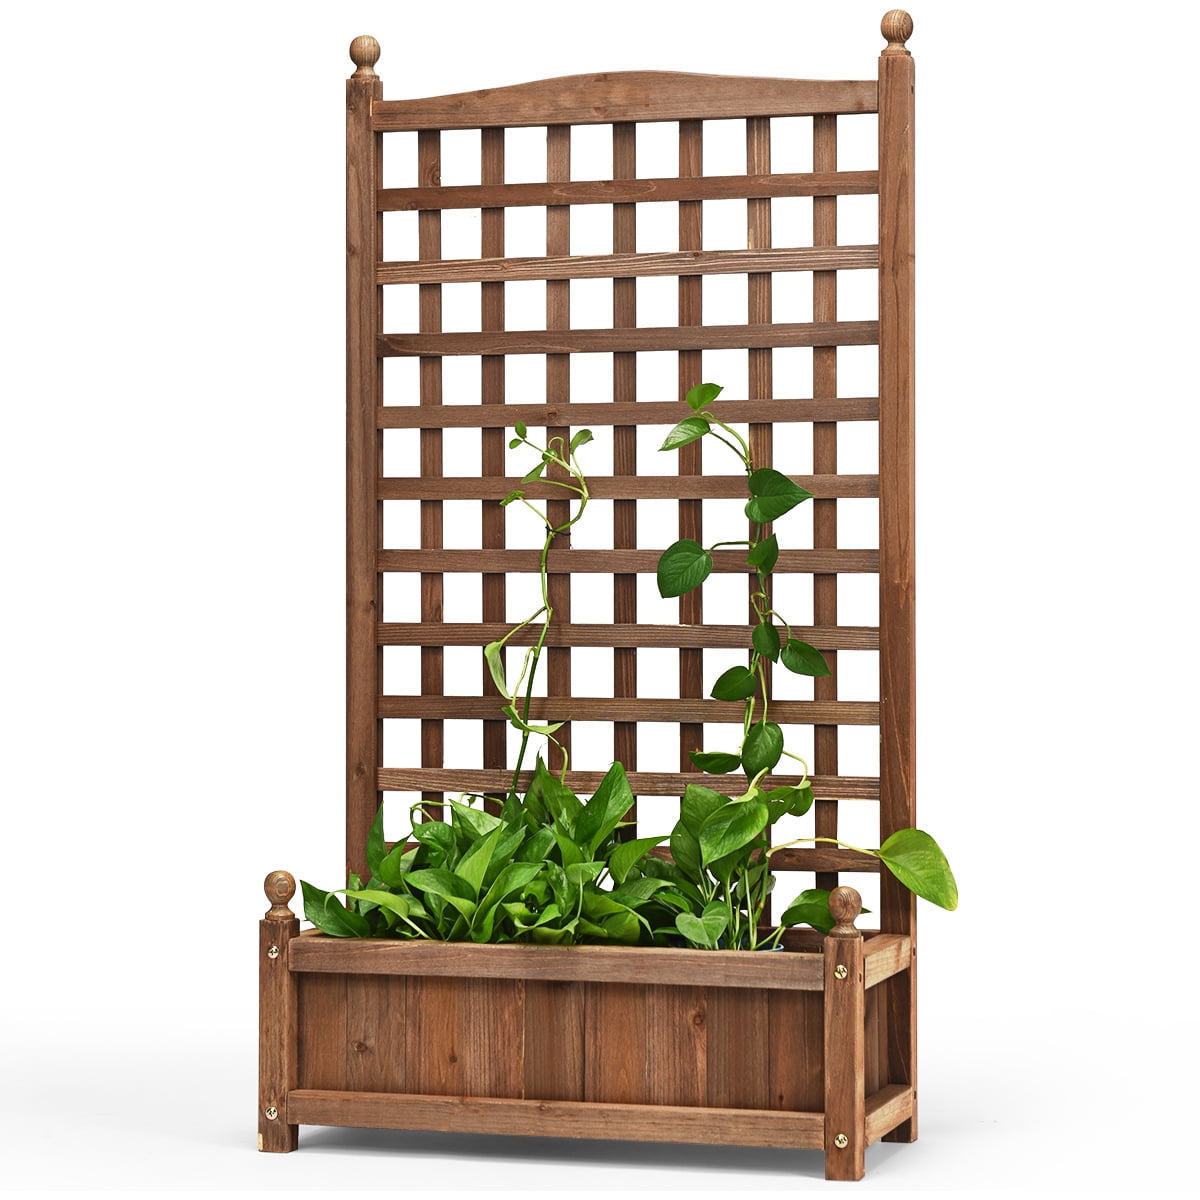 Details about   Solid Wood Planter Box with Trellis Weather-resistant Outdoor 